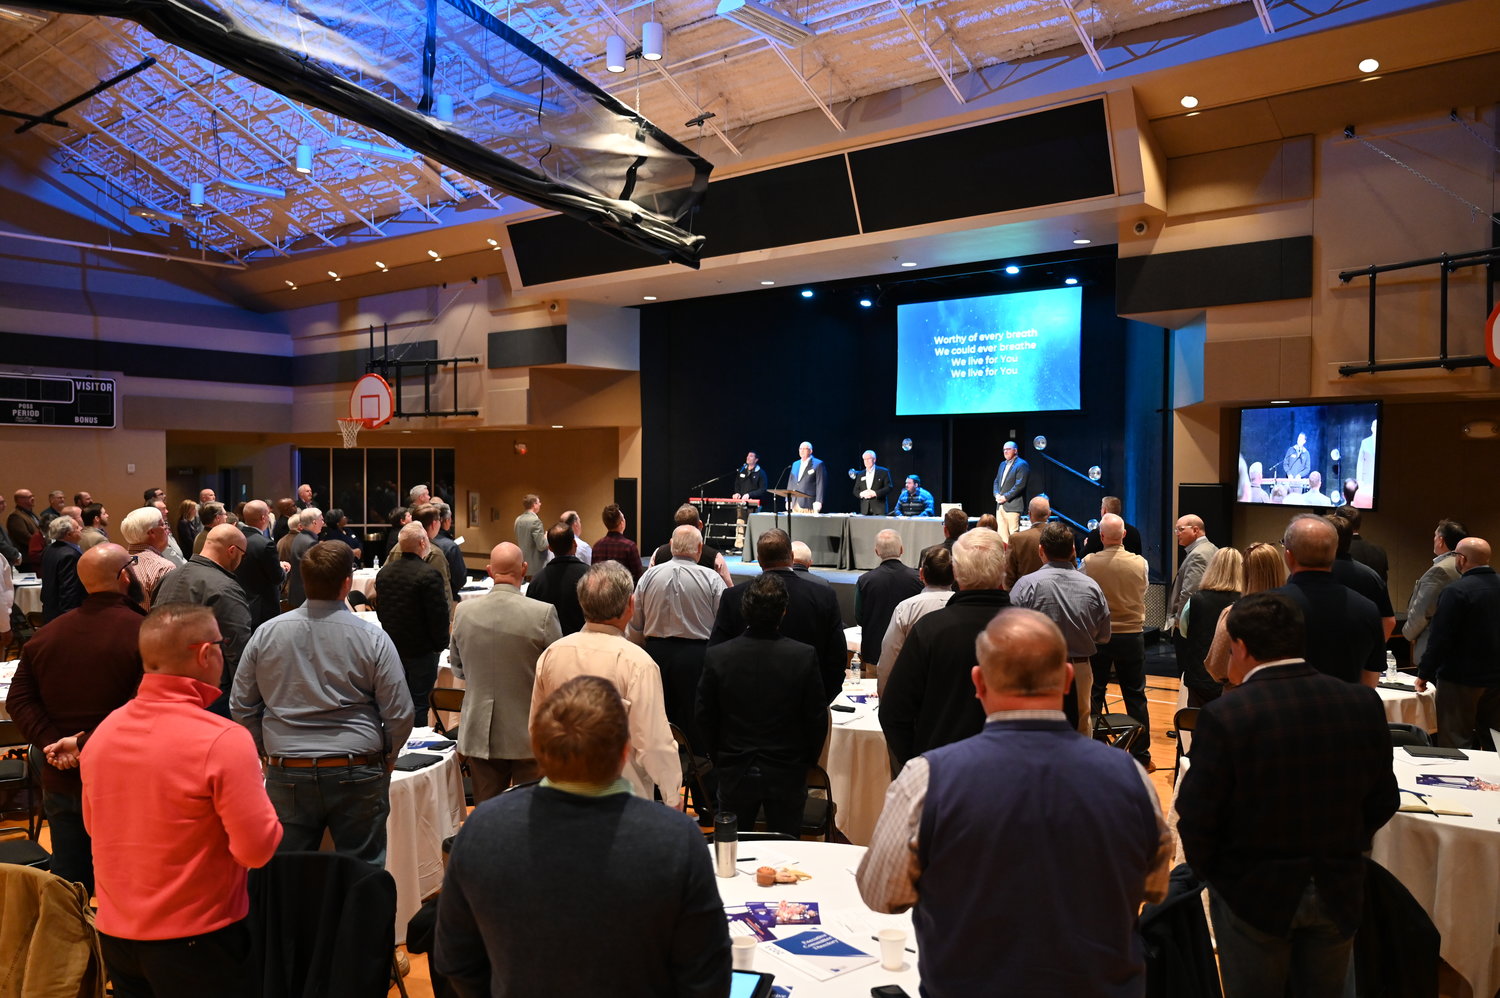 Members of the Executive Committee open Tuesday's meeting by singing praises to the Lord. (Index/Roger Alford)